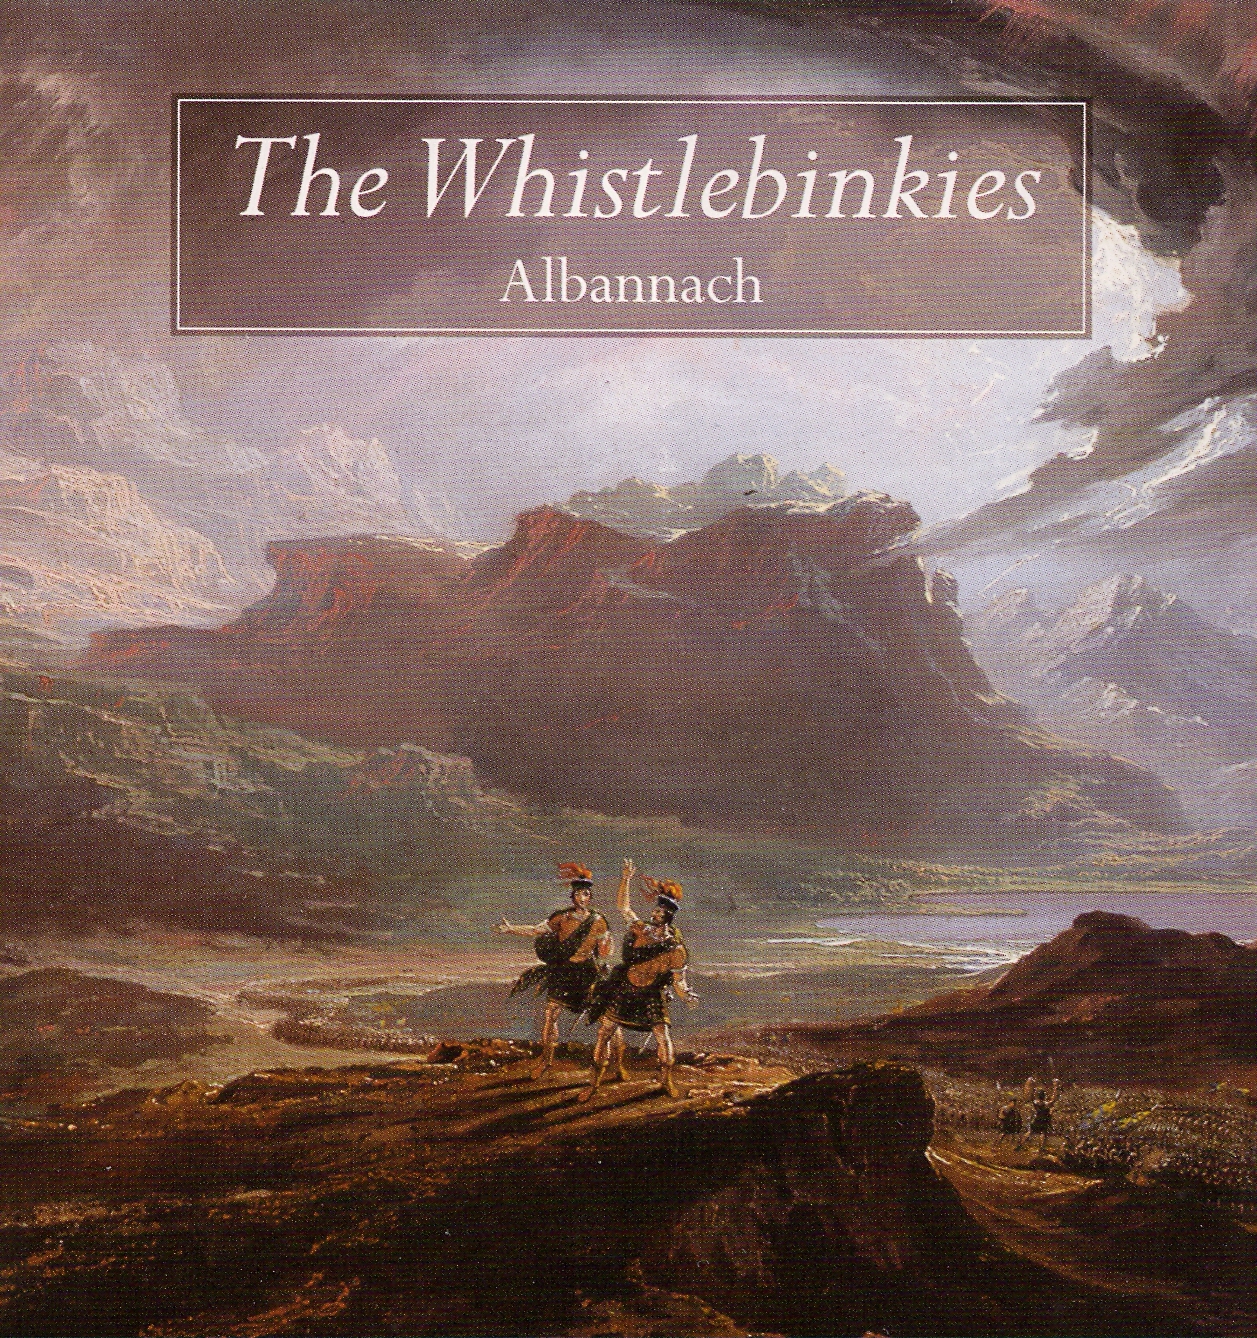 Eddie wrote The Albannach for the 7:84 theatre group, making it a suite for The Whistlebinkies